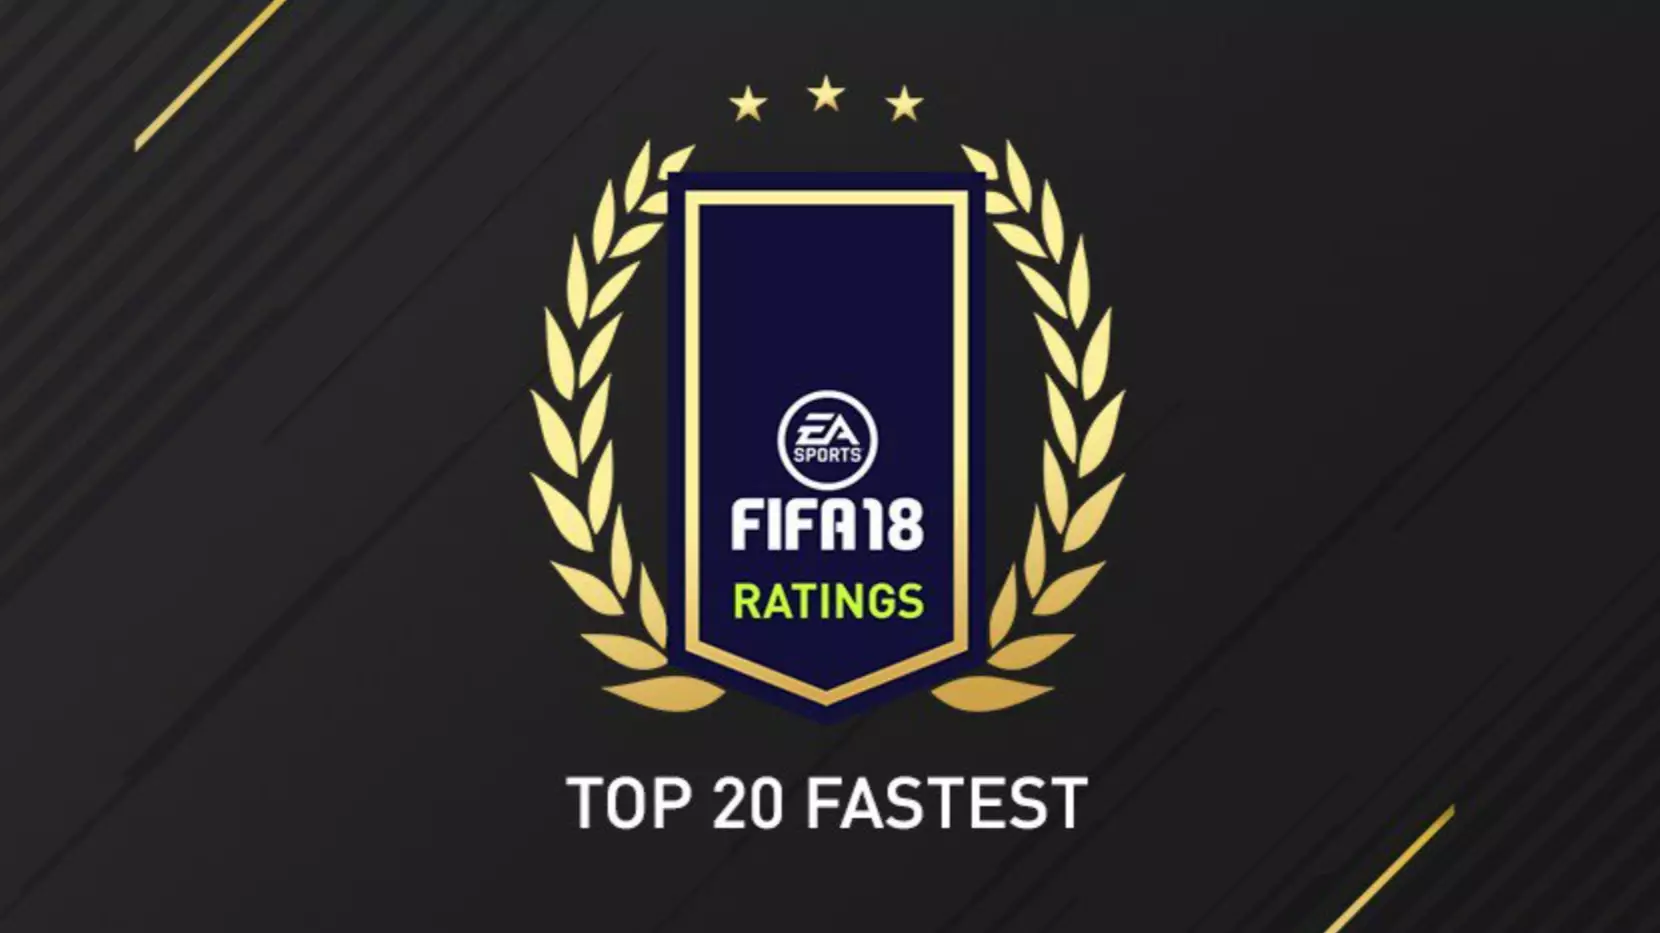 The 10 Fastest Players On FIFA 18 Have Been Revealed